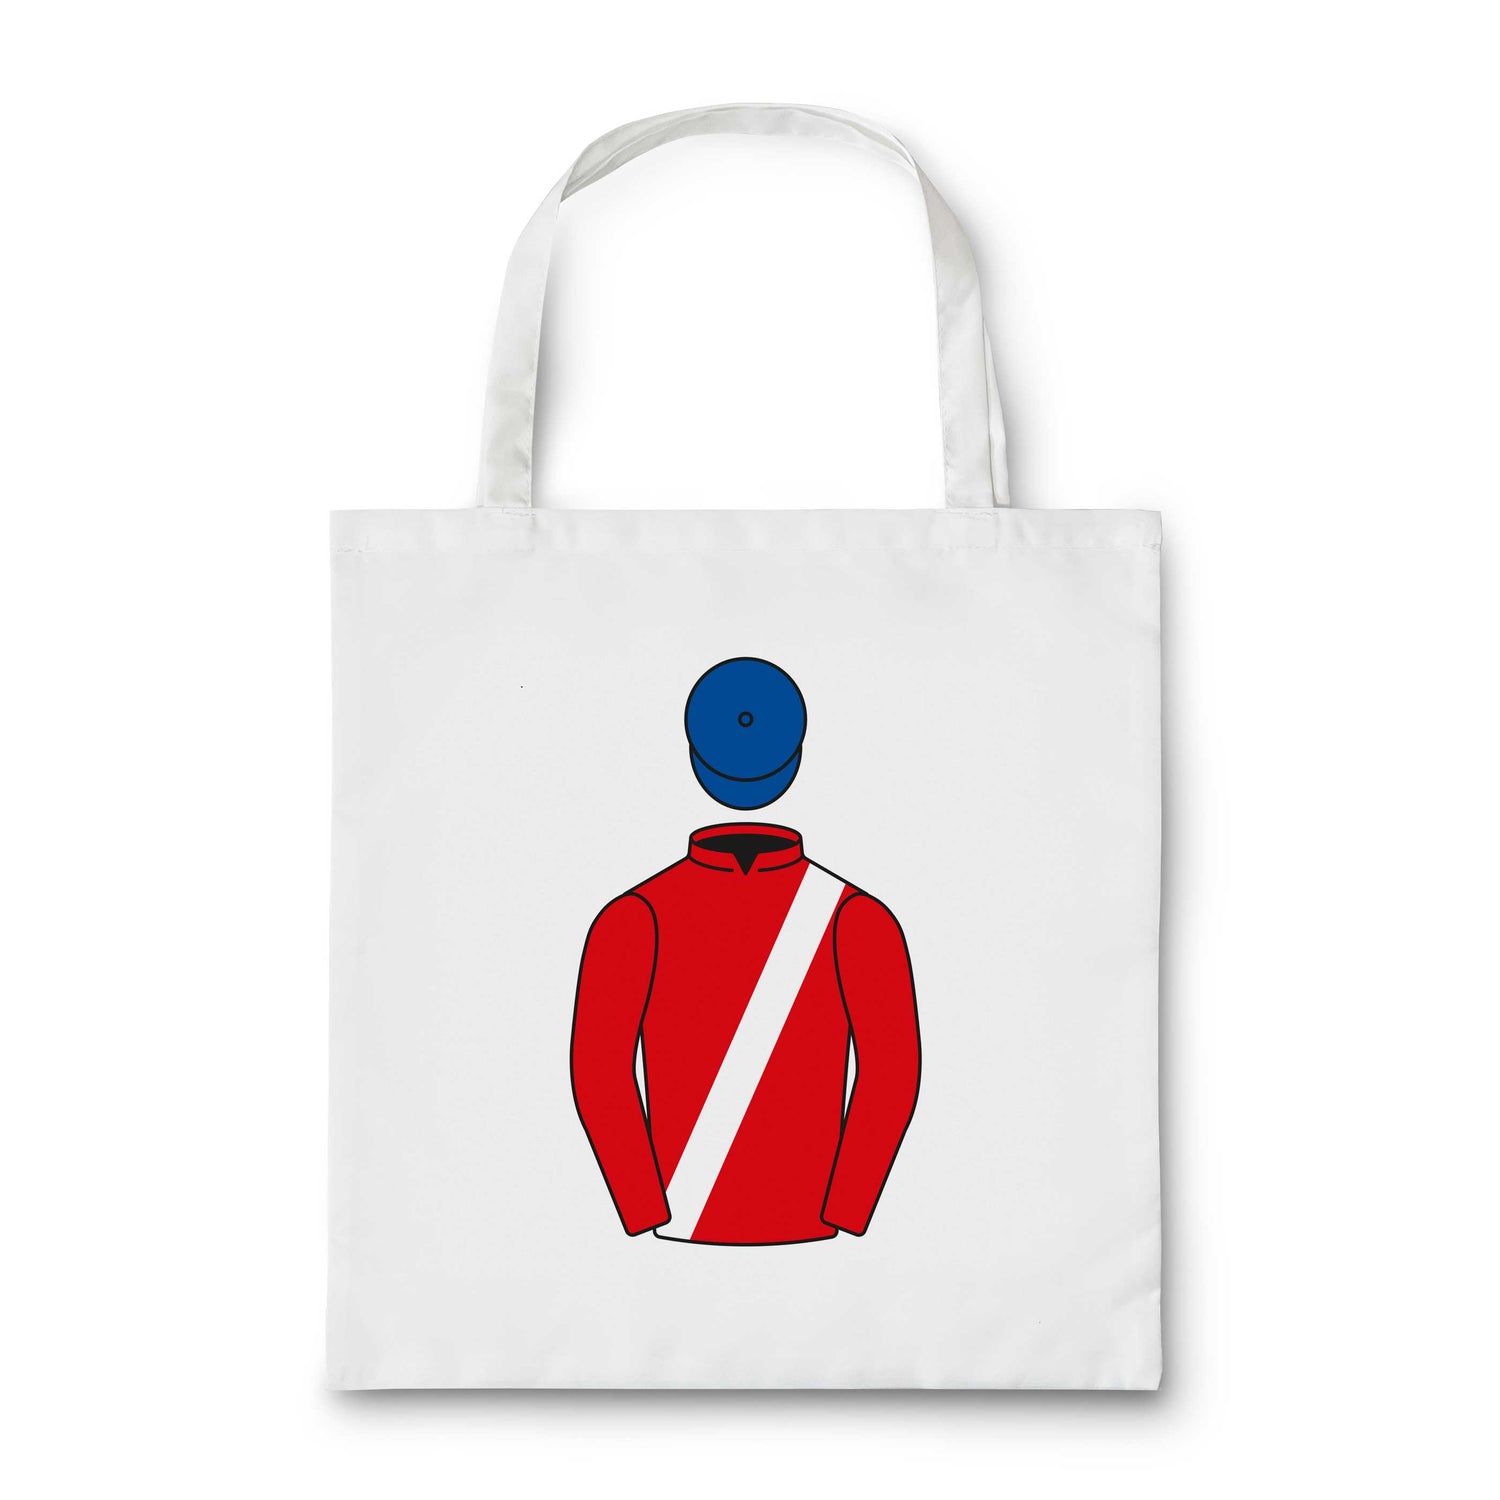 Cheveley Park Stud Tote Bag - Tote Bag - Hacked Up